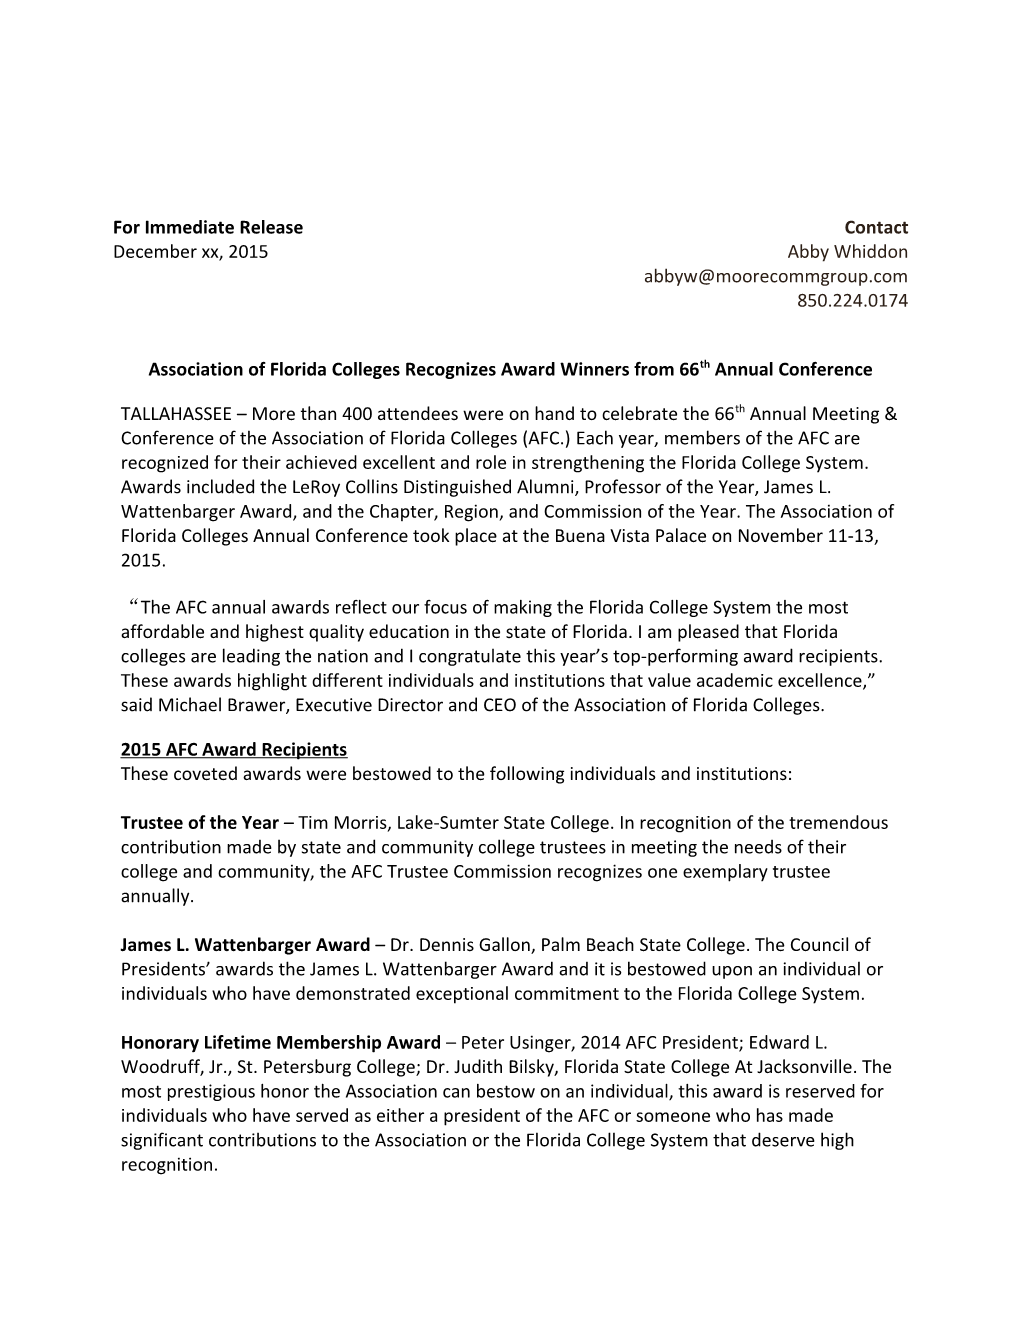 Association of Florida Colleges Recognizes Award Winners from 66Th Annual Conference